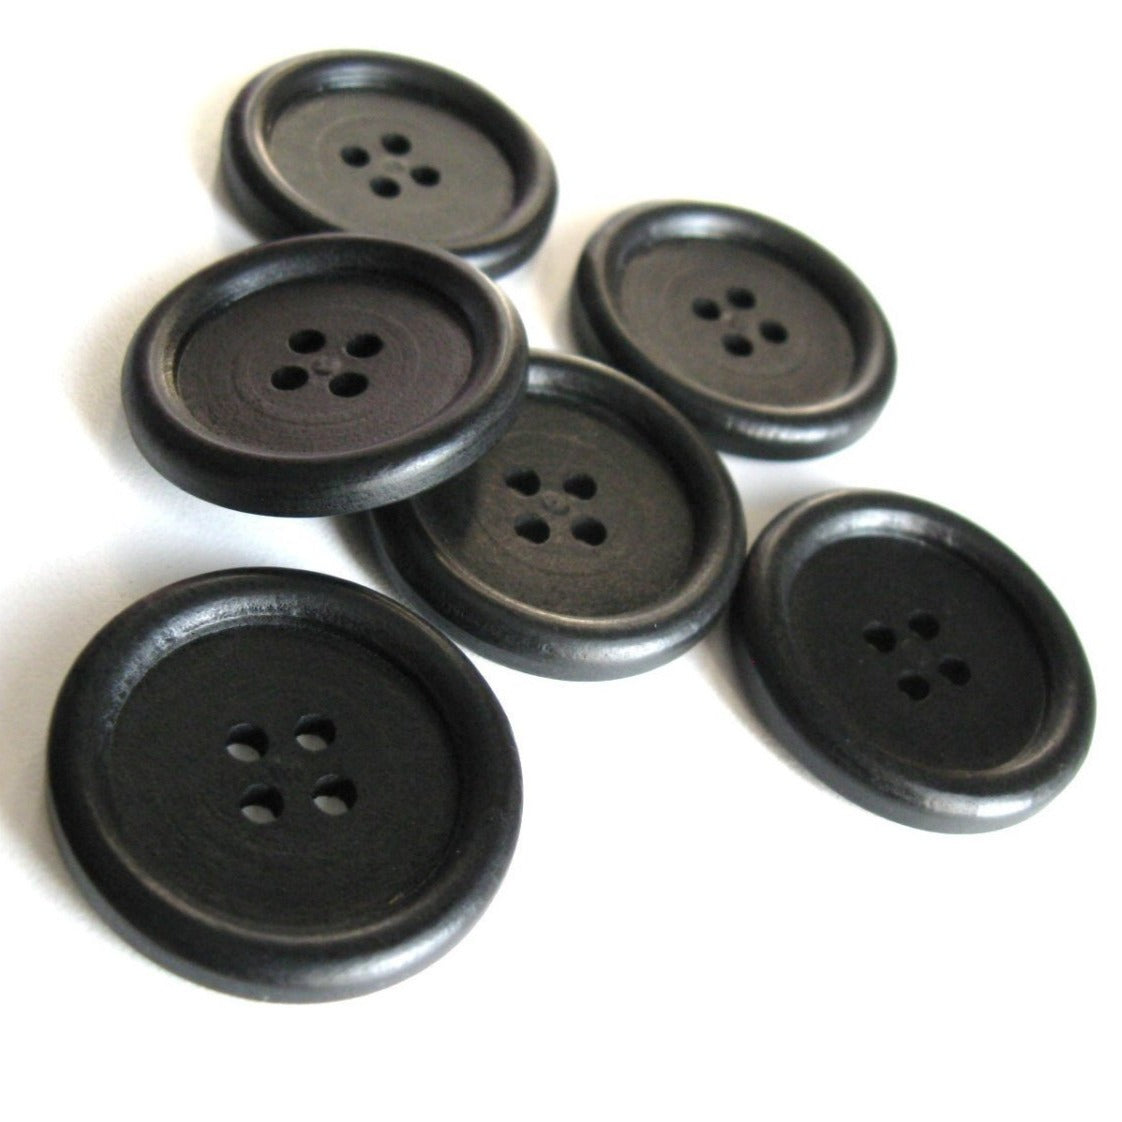 Swirl Pattern Wooden Sewing Buttons 30mm - Natural and Black wood butt